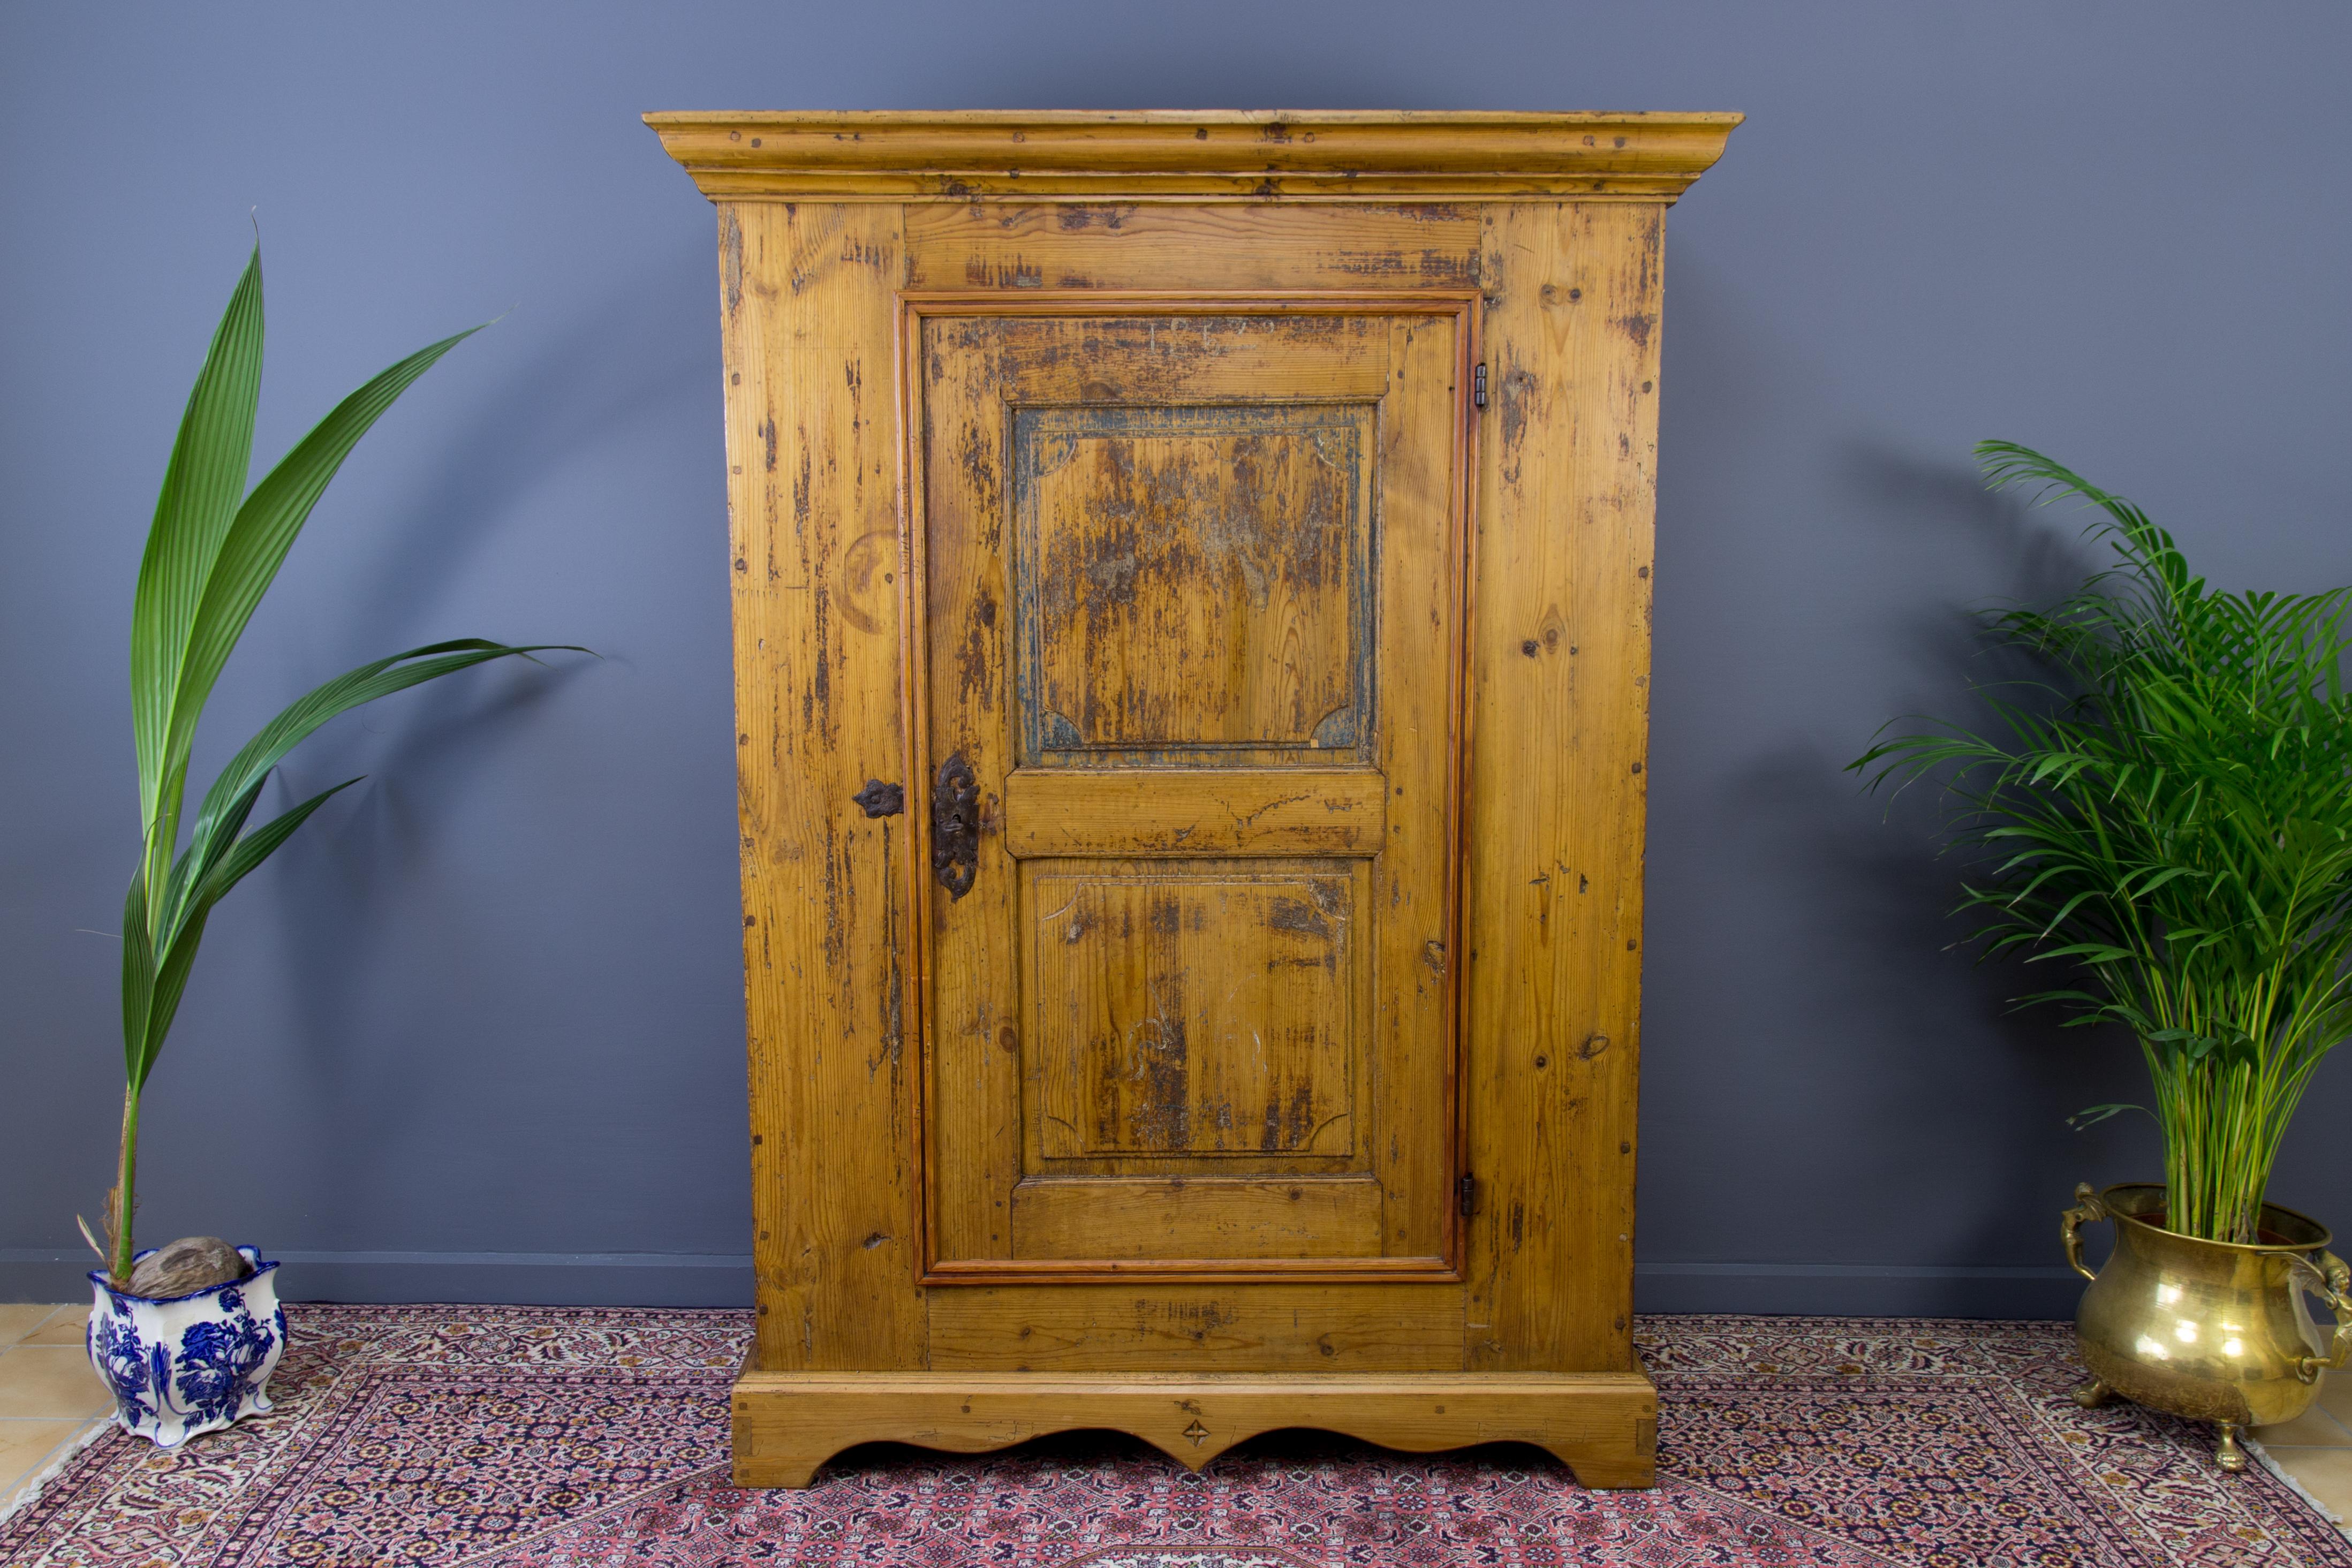 This unique and antique one-door Baltic pine armoire or wardrobe was handcrafted and hand-painted in the middle of the 19th century. The armoire is dated 1852, but it could have been made earlier. There are three shelves, one small interior drawer,